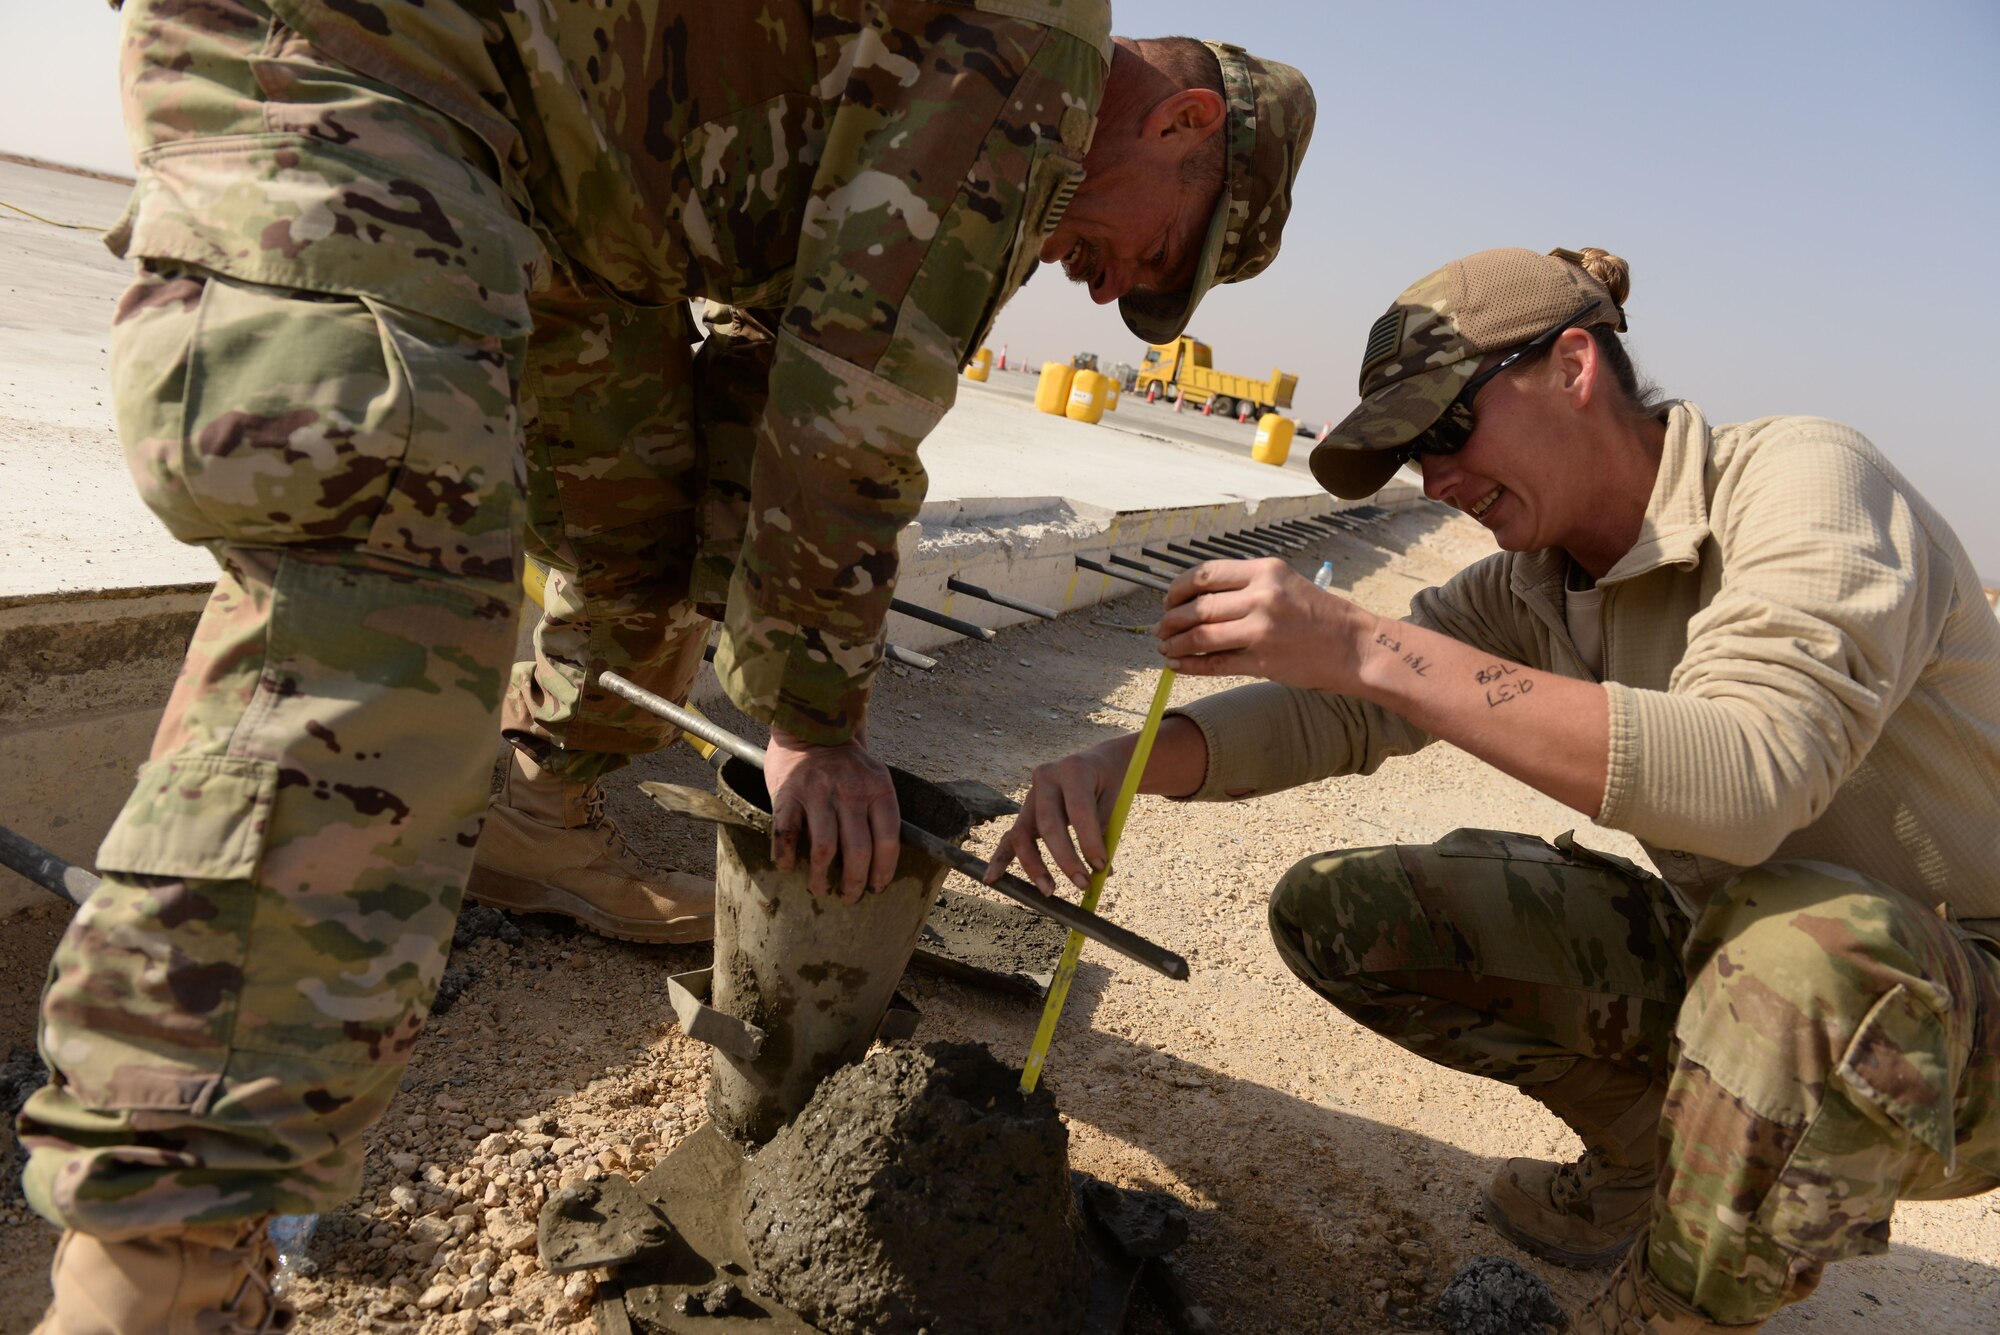 Staff Sgt. Joseph Buch and Tech Sgt. Erin Eagleson, North Dakota Air National Guardsmen assigned to the 332nd Expeditionary Civil Engineer Squadron take a slump measurement while testing a fresh batch of concrete before her team pours a new slab of concrete at an undisclosed location in Southwest Asia Nov. 28, 2017. The sample is checked for fluidity and strength on the seventh and 28th day to ensure a proper product has been provided. (U.S. Air Force photo by Senior Master Sgt. Cohen A. Young)